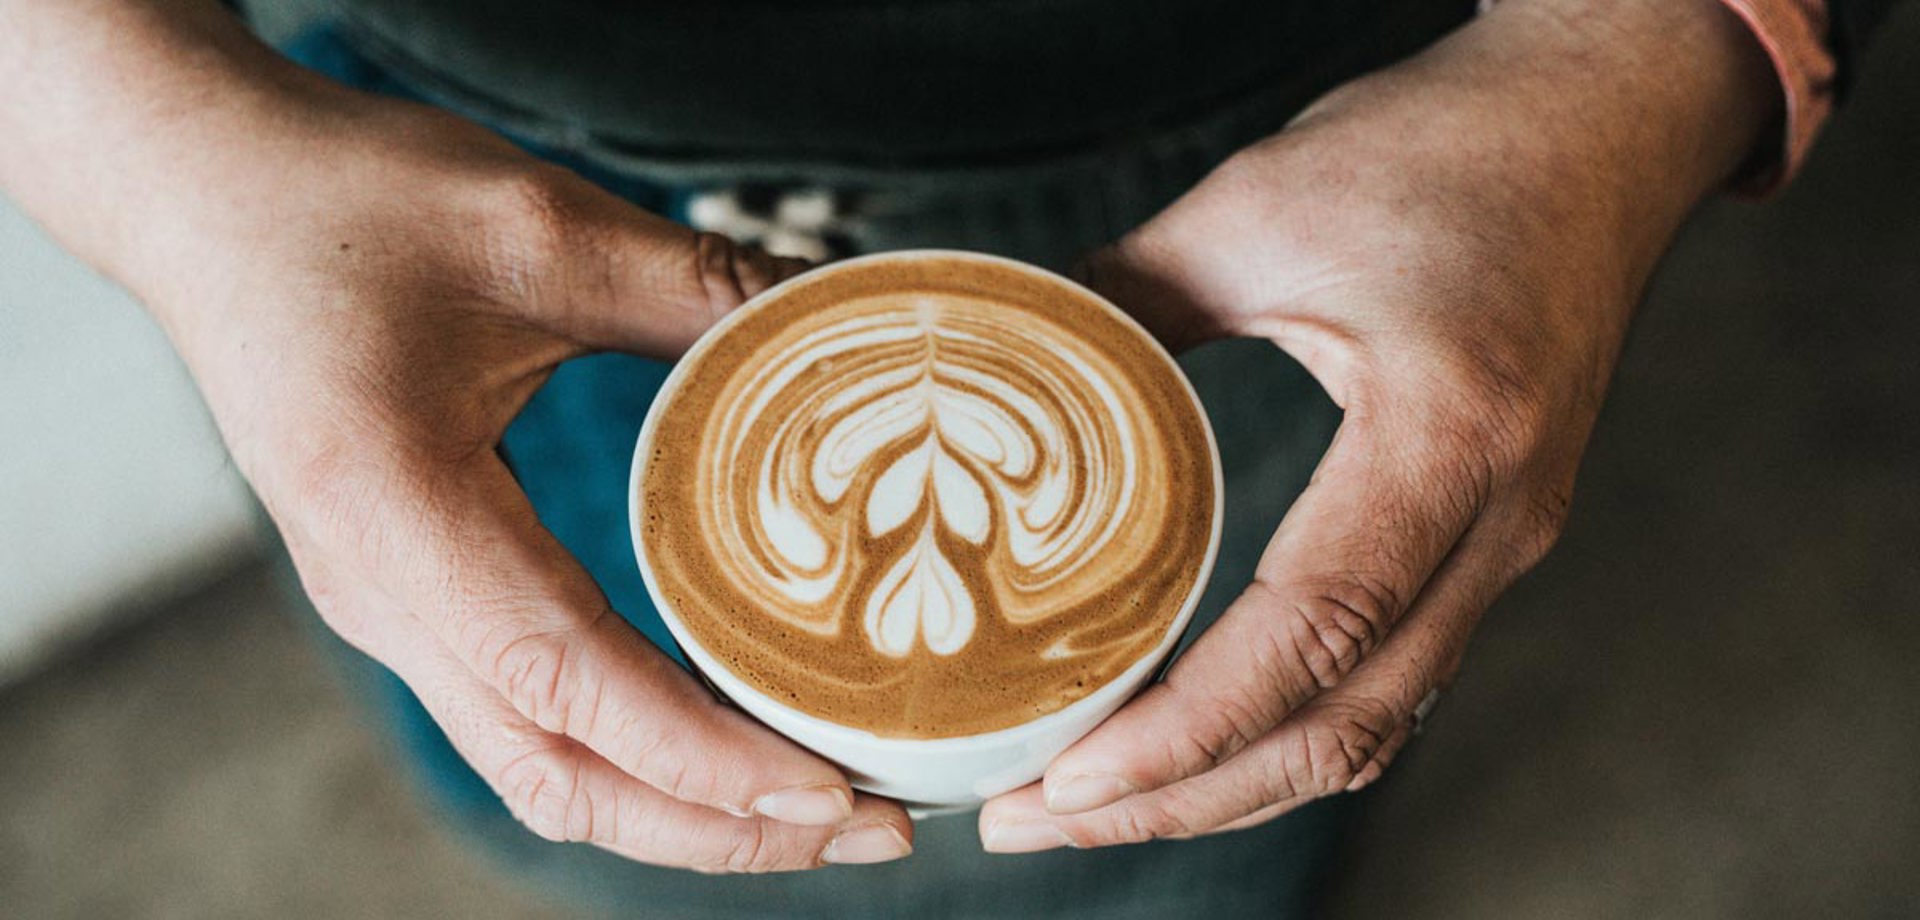 A barista is holding a coffee cup, filled with a coffee topped with decorative latte art.